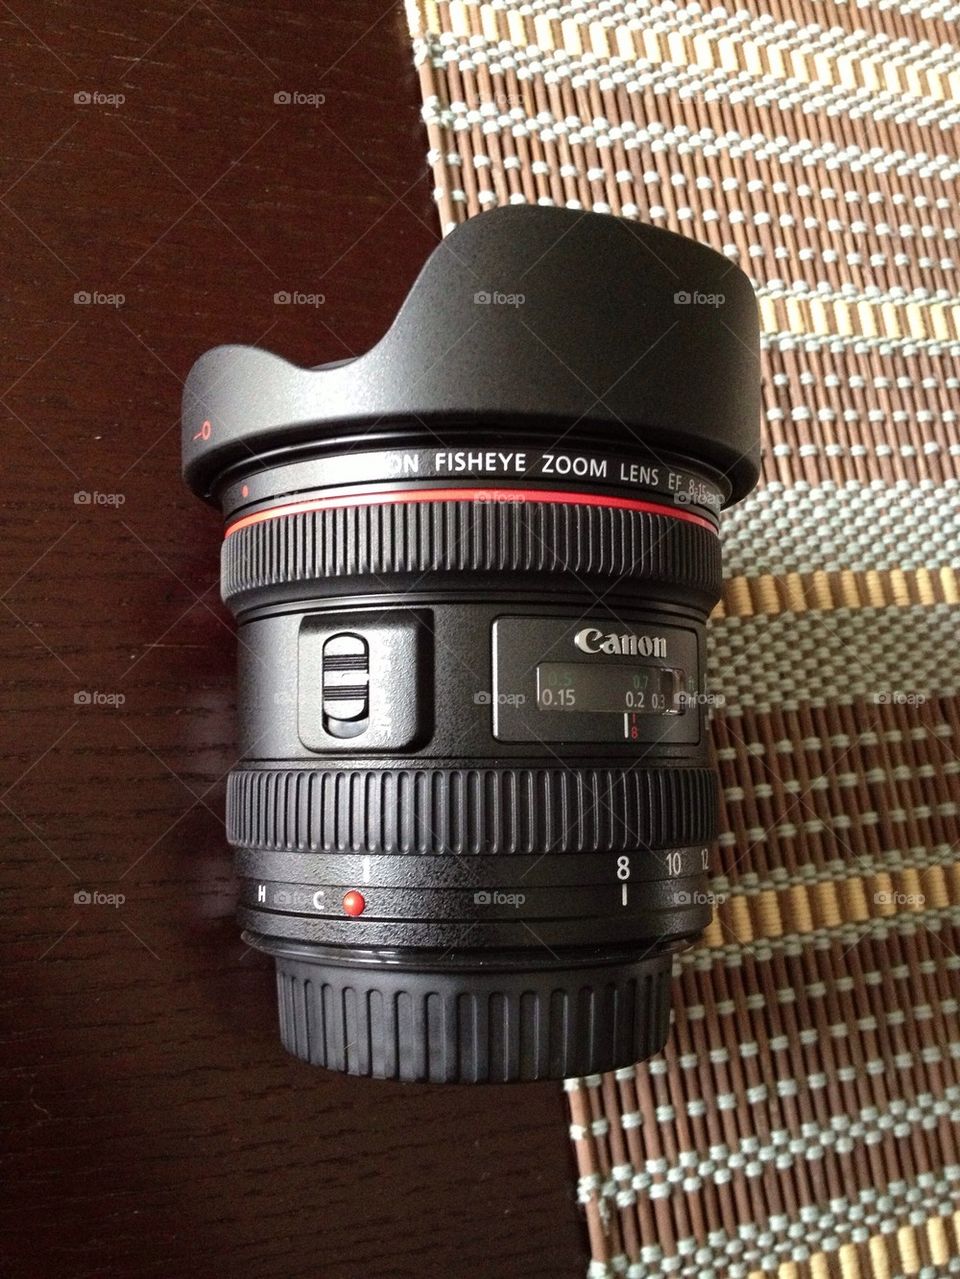 The new lens